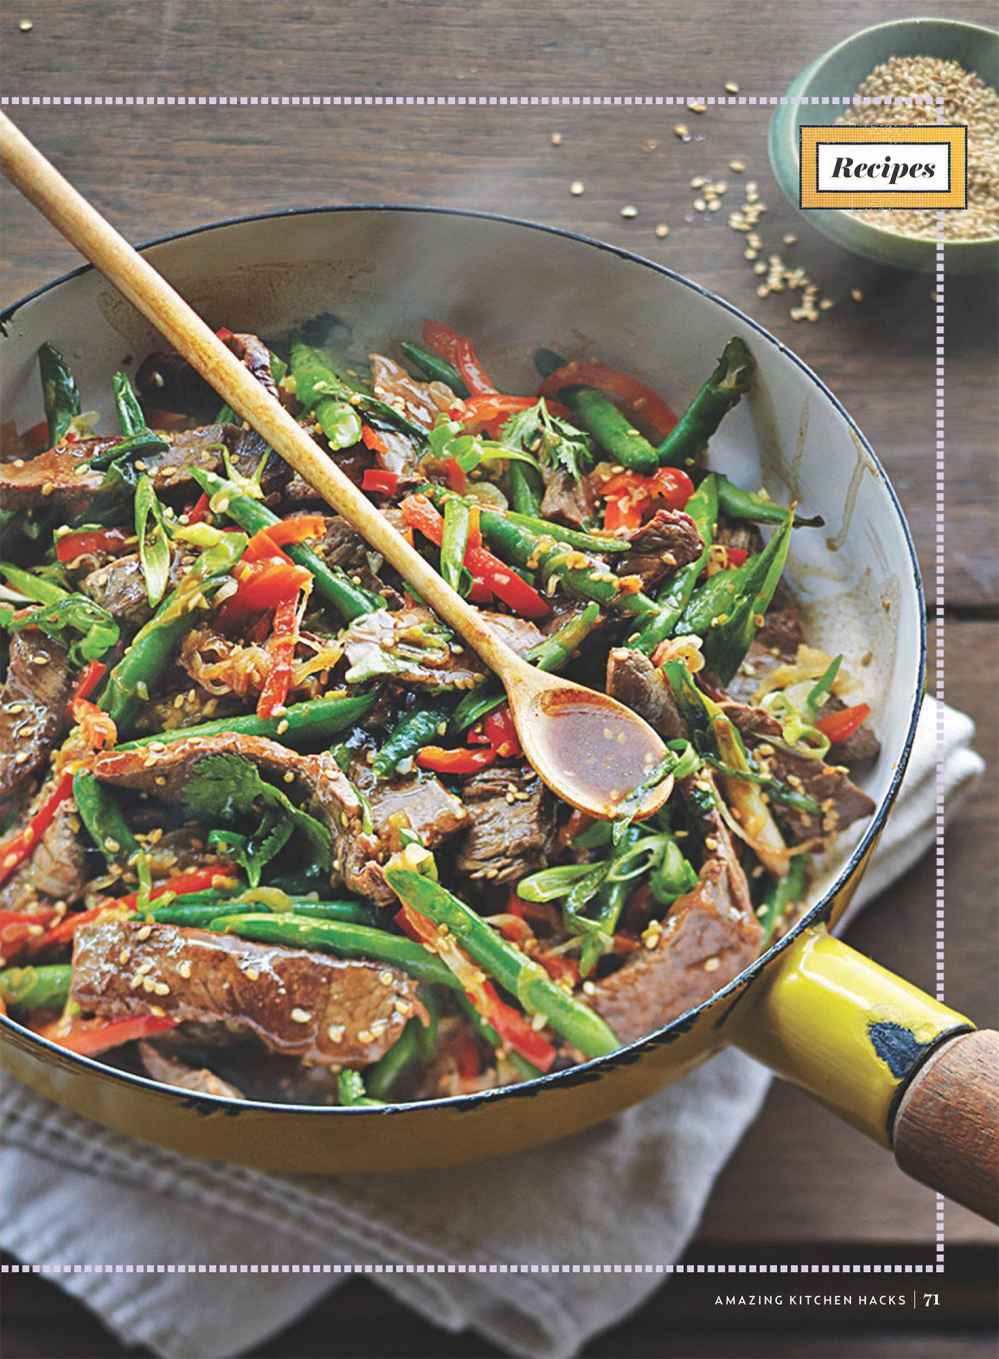 Curtis Stone Shares His 10-Minute Recipe for Steak and Green Bean Stir-Fry With Ginger and Garlic